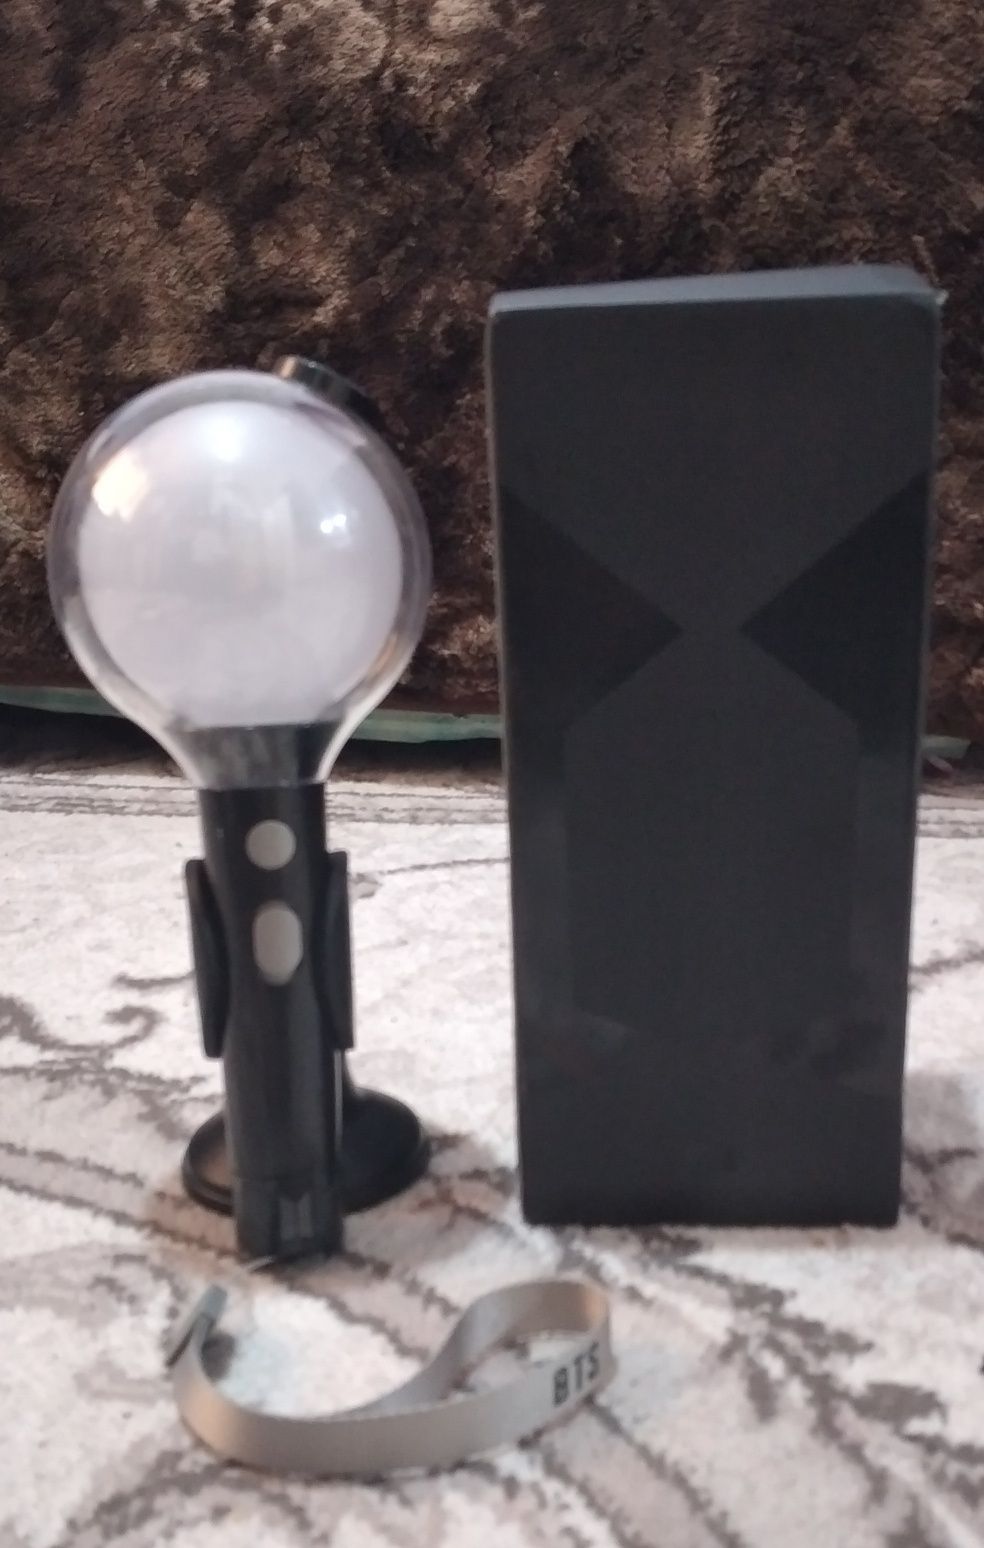 BTS/ARMY BOMBS/ARMY стелла/ARMY бомбочка